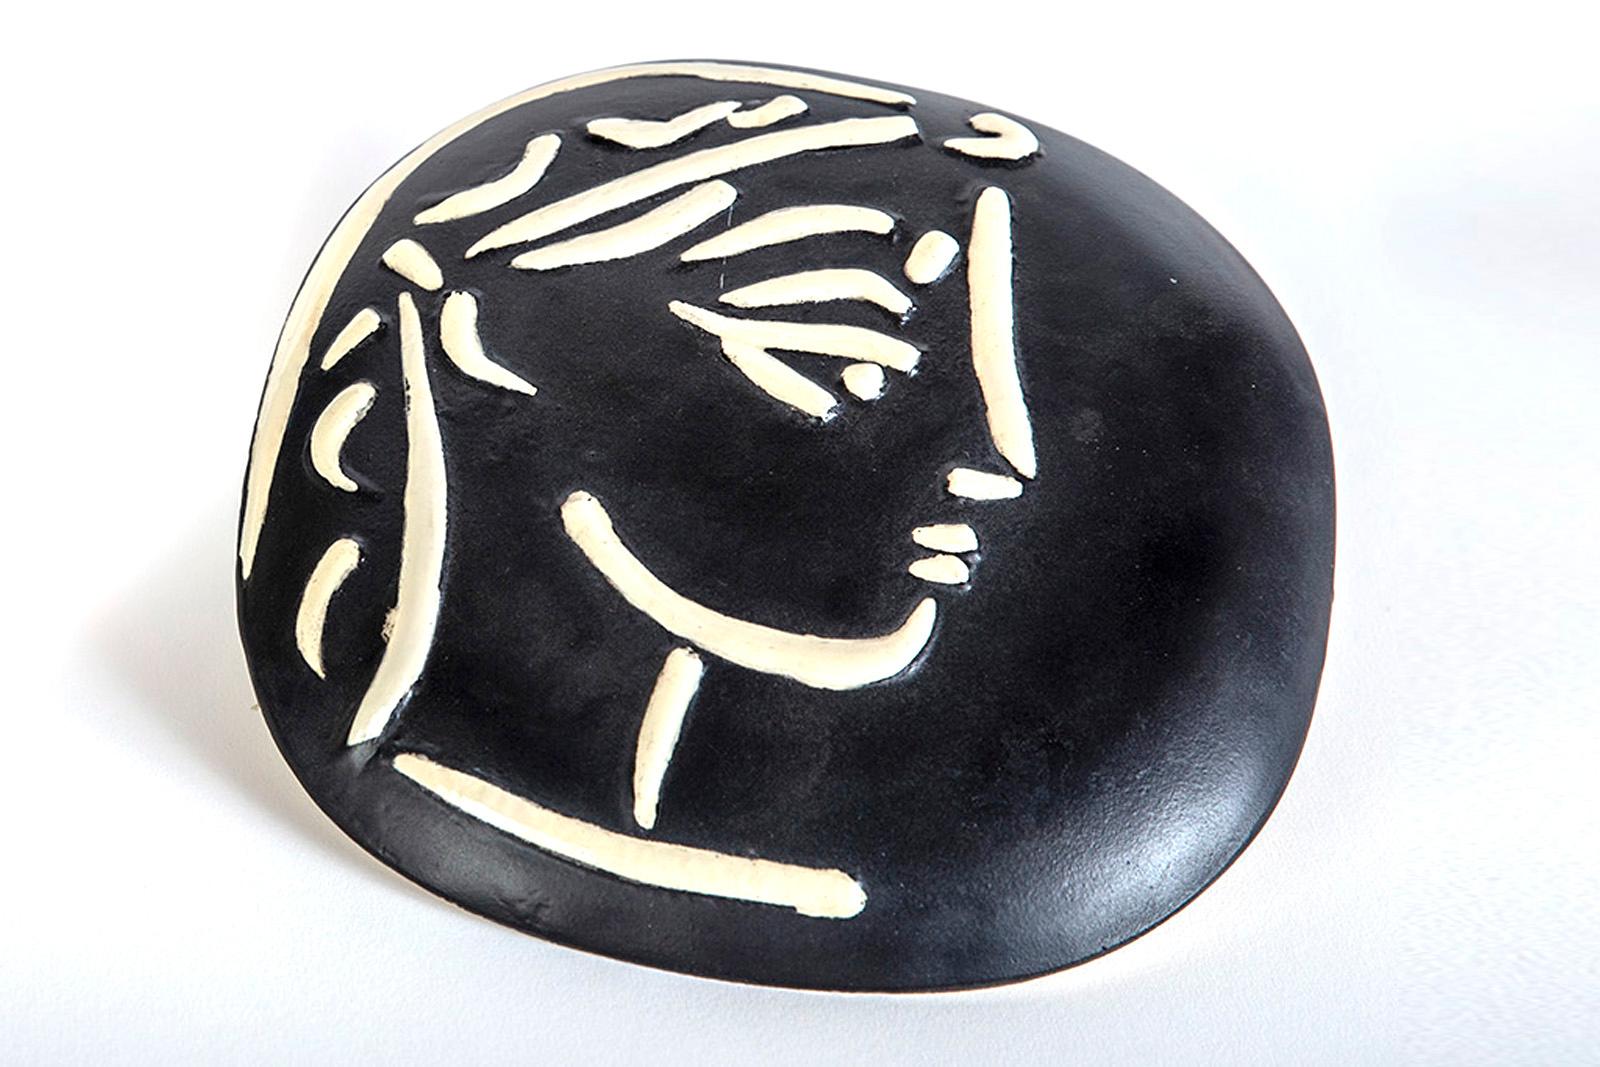 Artist: Pablo PIcasso

Title: Profil de Jacqueline (Jacqueline’s Profile)

Medium: Madoura convex wall plaque of white earthenware clay, engraving accentuated with glaze, black patinated ground (ivory, brown)

Size: 7 1/4"

Edition: 500 limited